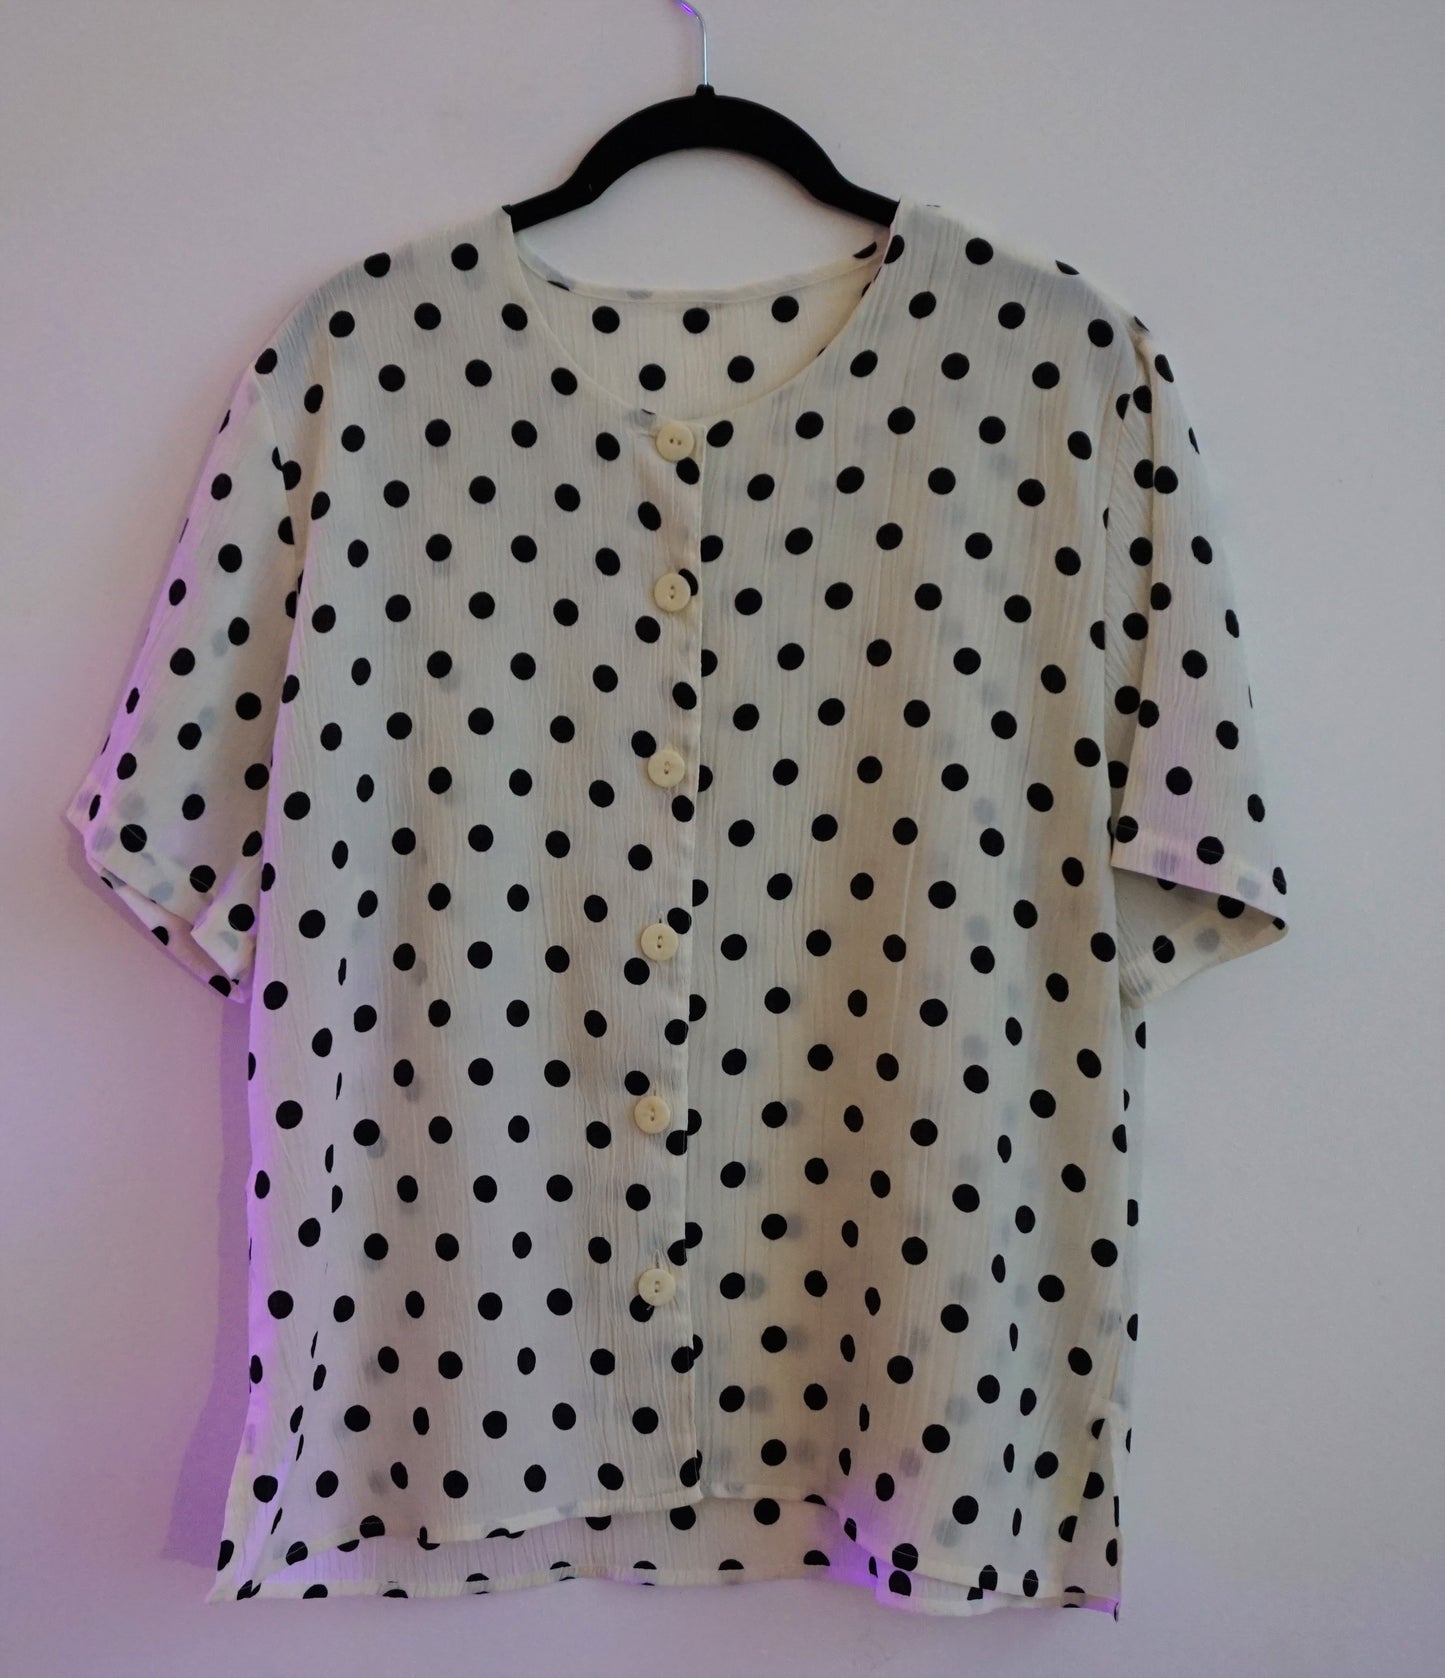 90s cream blouse with black polka dots